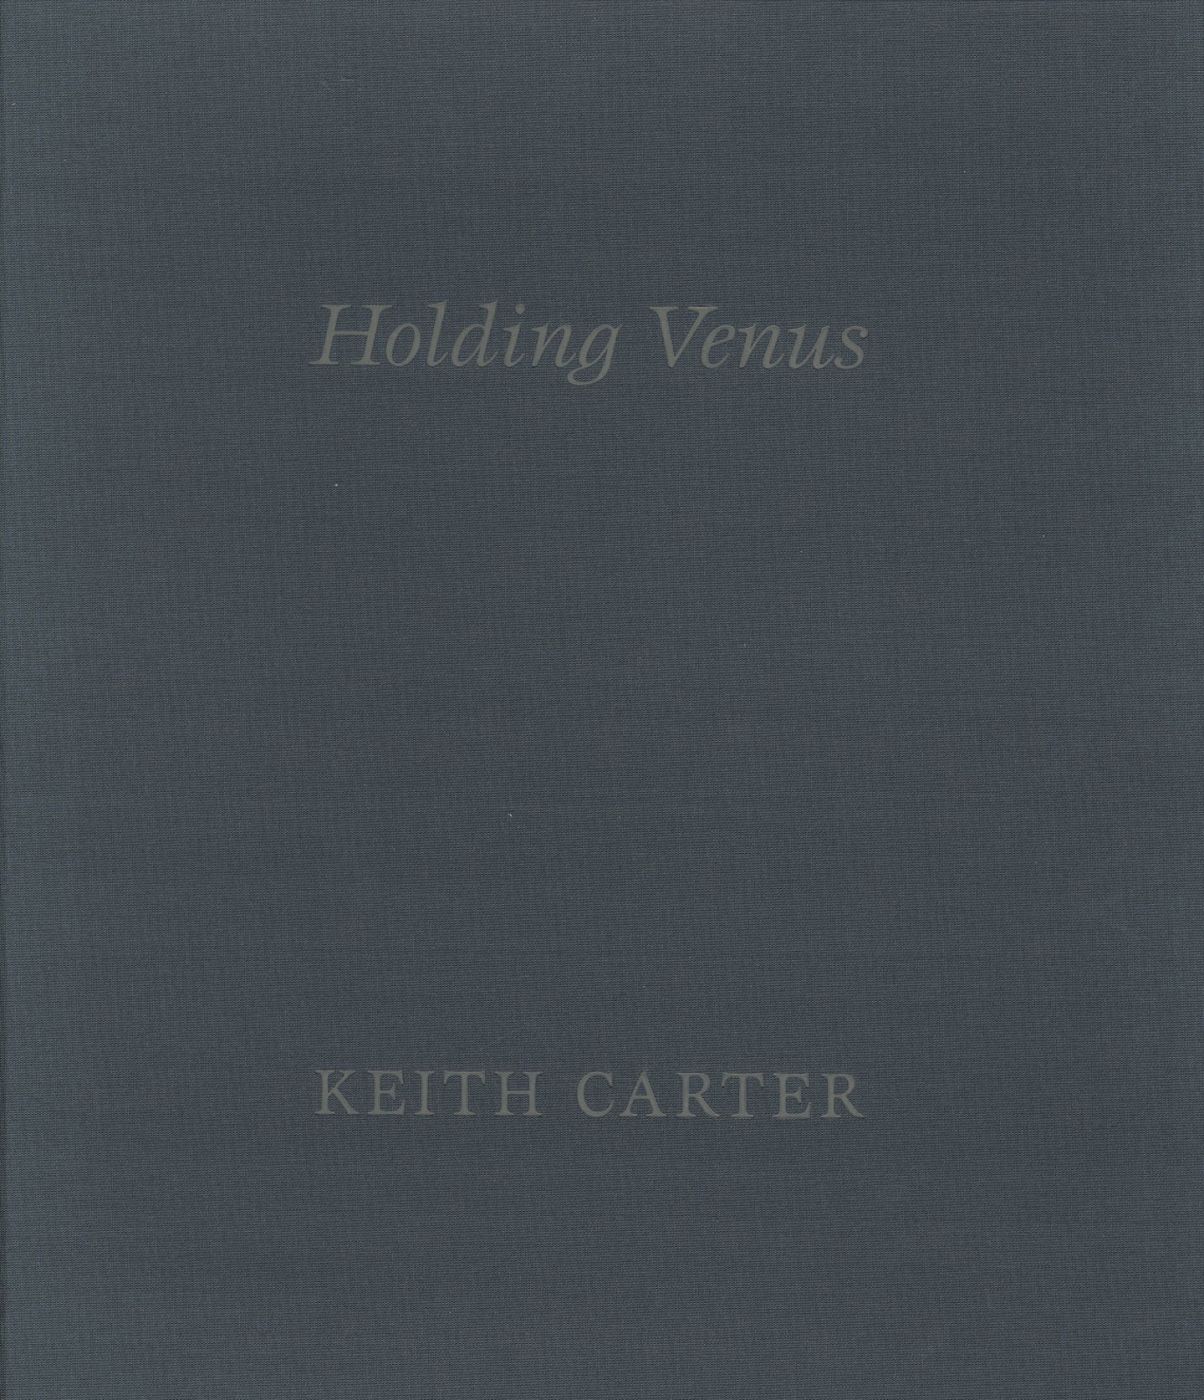 Keith Carter - arena editions - holding venus